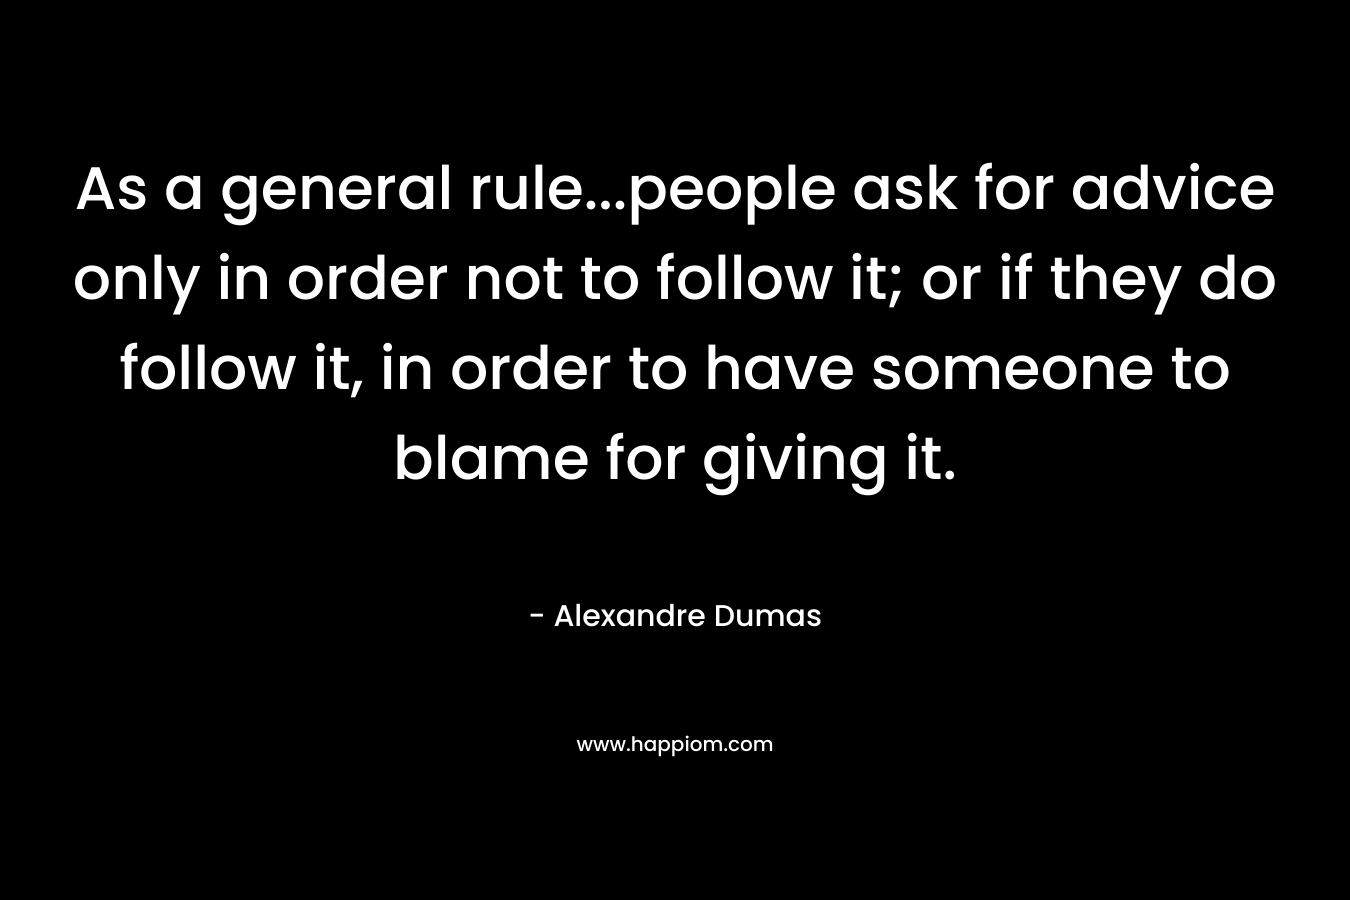 As a general rule...people ask for advice only in order not to follow it; or if they do follow it, in order to have someone to blame for giving it.